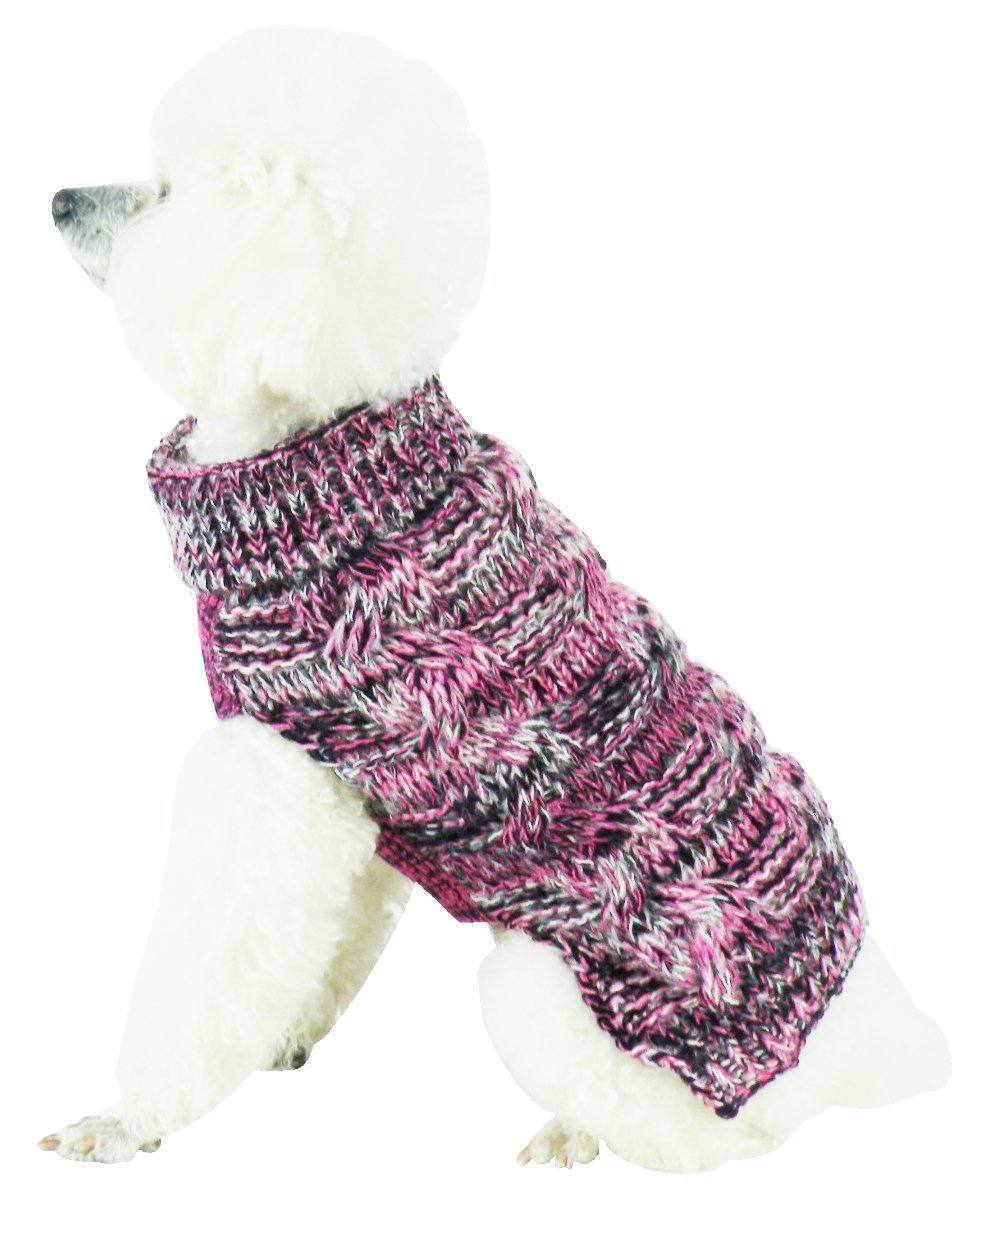 Pet Life ® 'Royal Bark' Heavy Cable Knitted Designer Fashion Dog Sweater X-Small Pink, Black And Grey